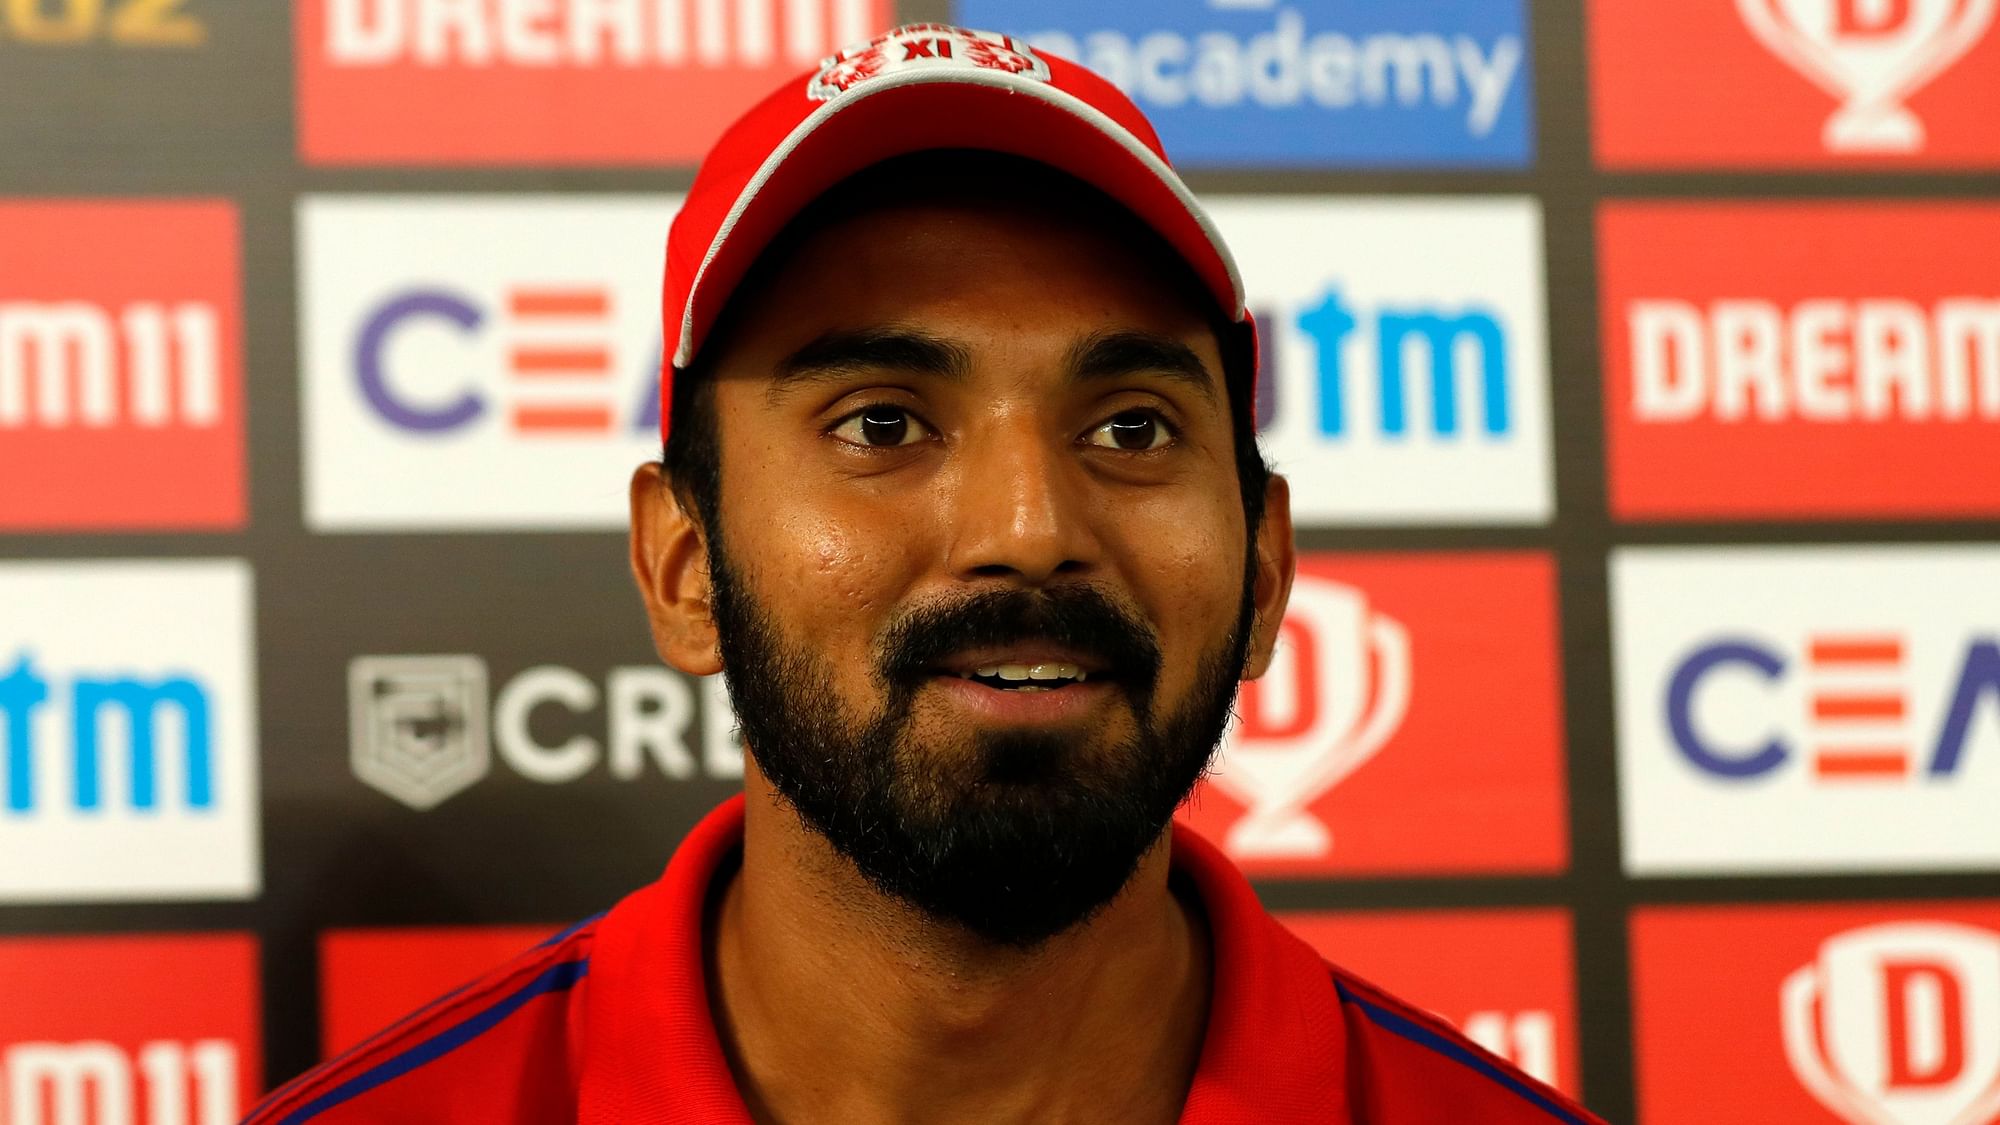 KL Rahul addressed the media’s questions after KXIP beat Delhi Capitals by 5 wickets.